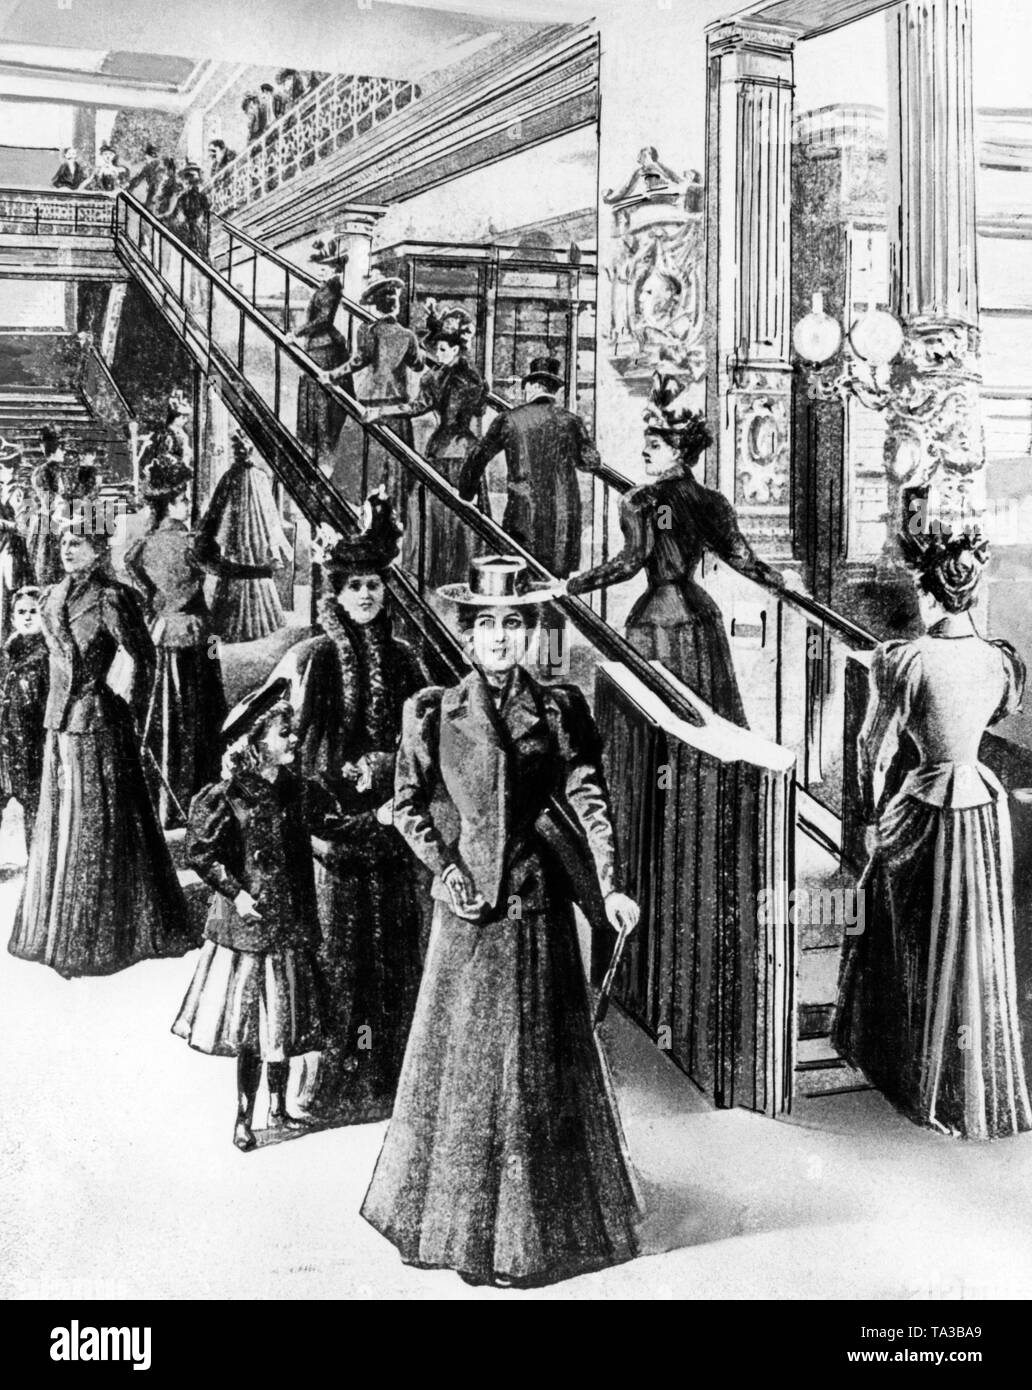 The contemporary drawing shows the first escalator in a Parisian department store. Stock Photo